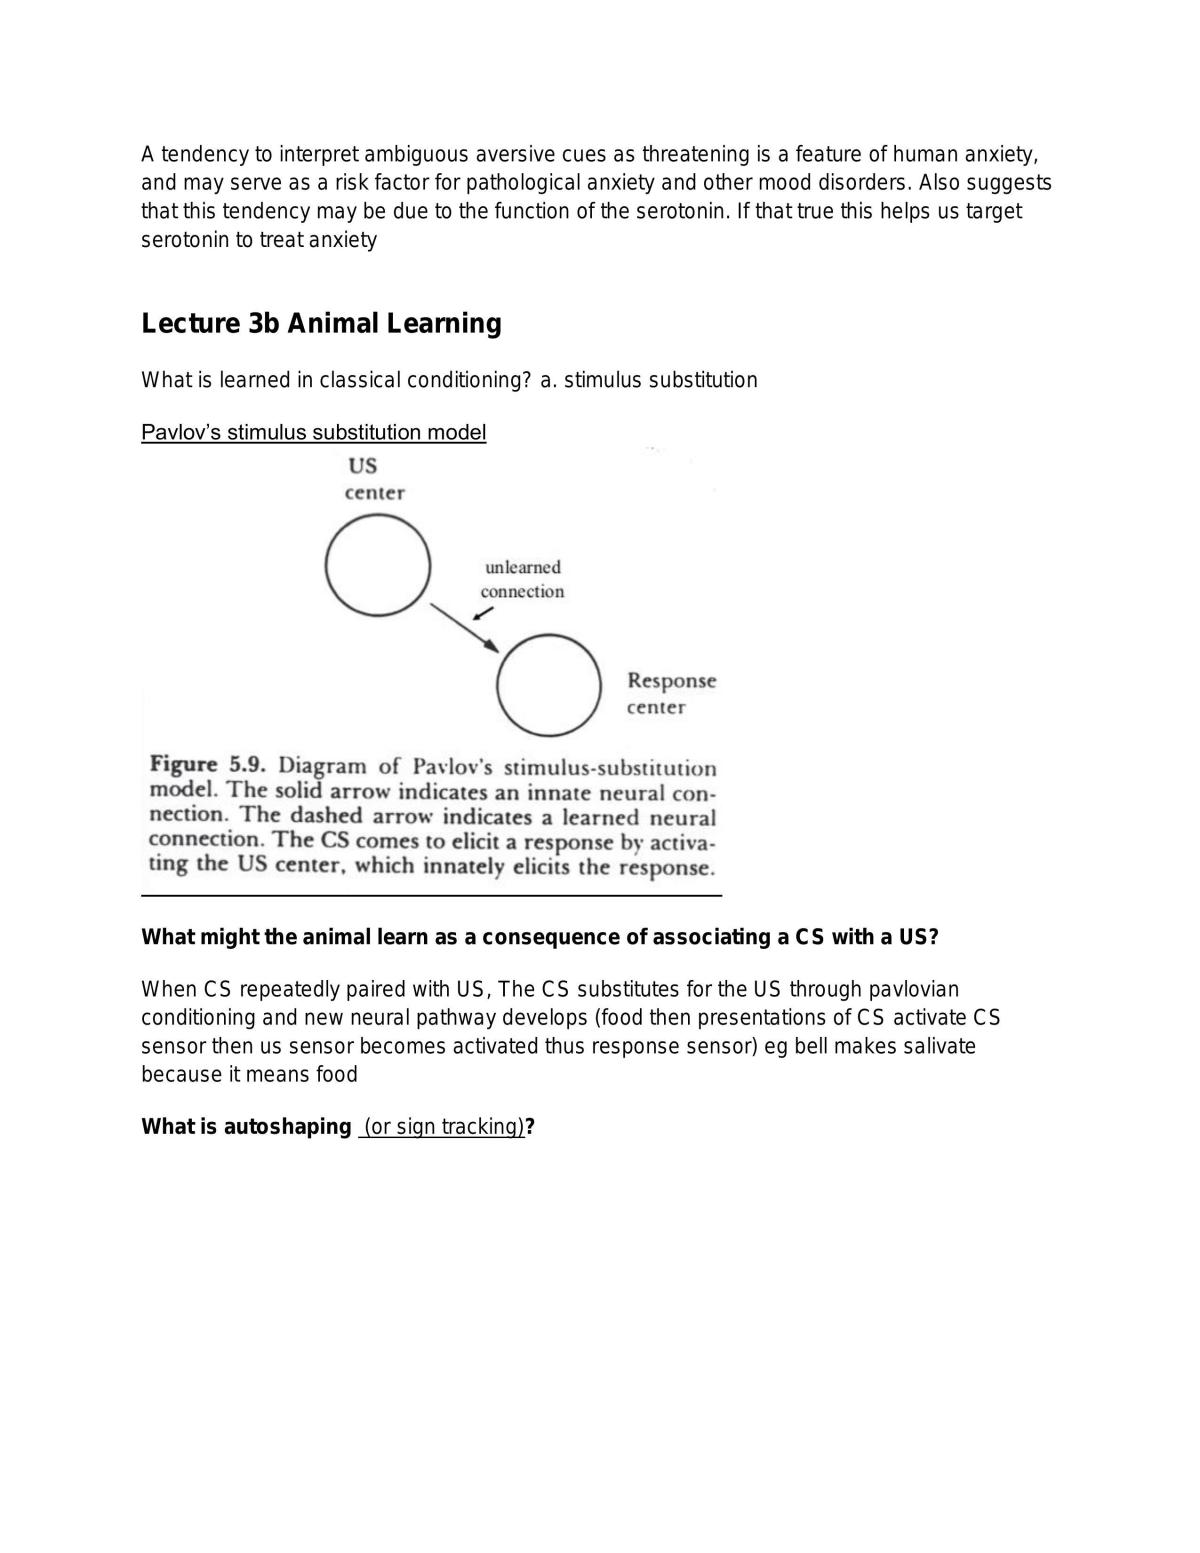 PSYC1011 Complete Study Notes - Page 62